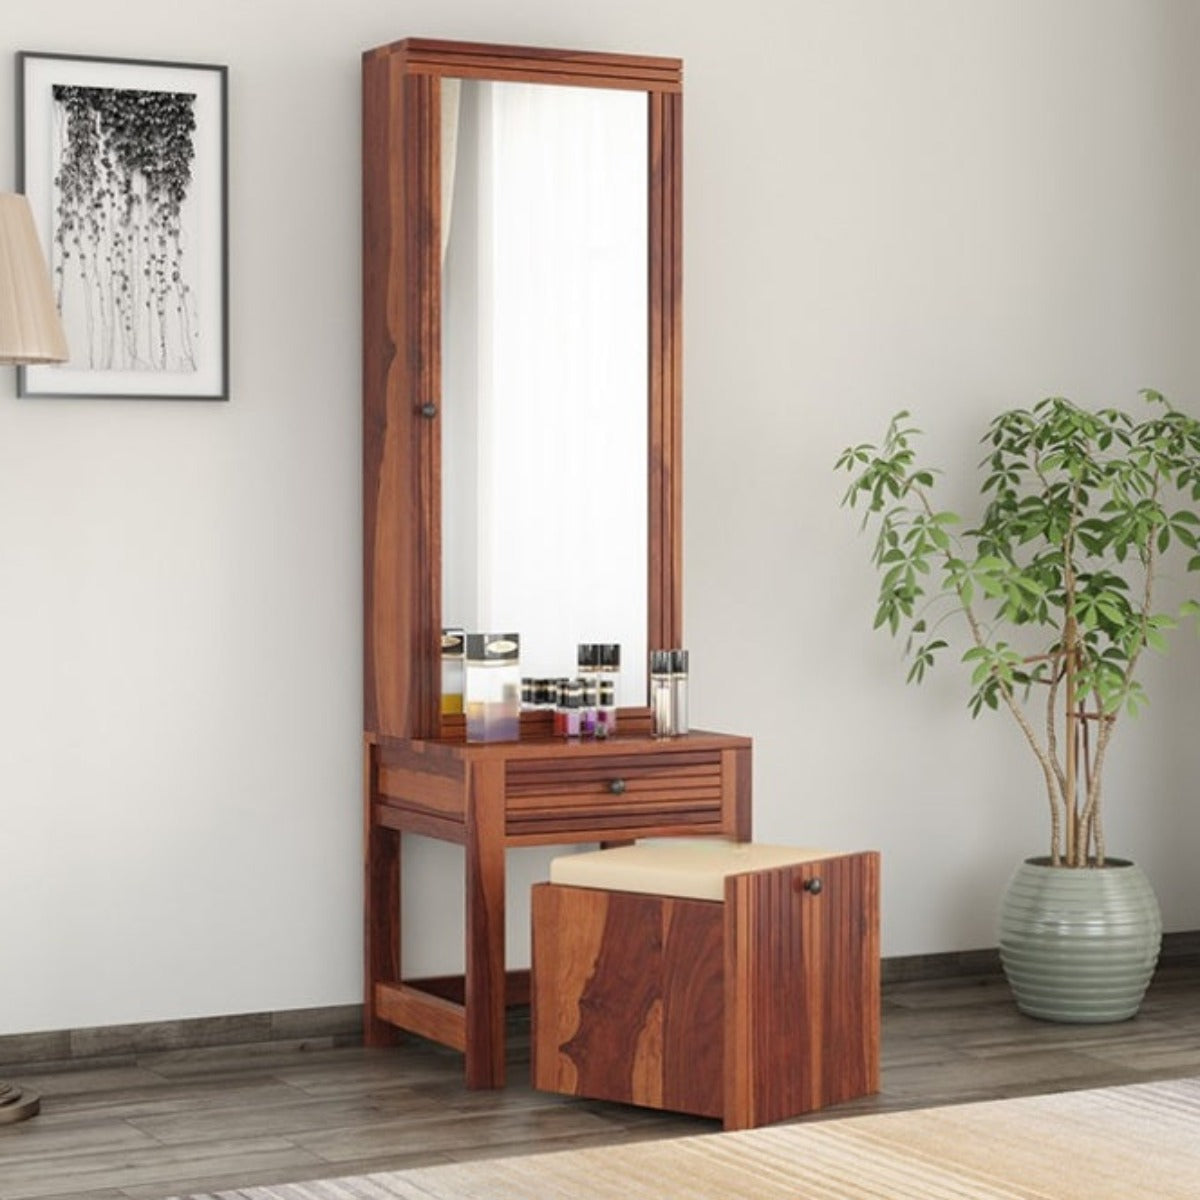 Wall Mounted Dressing Table Designs For Bedroom | Design Cafe